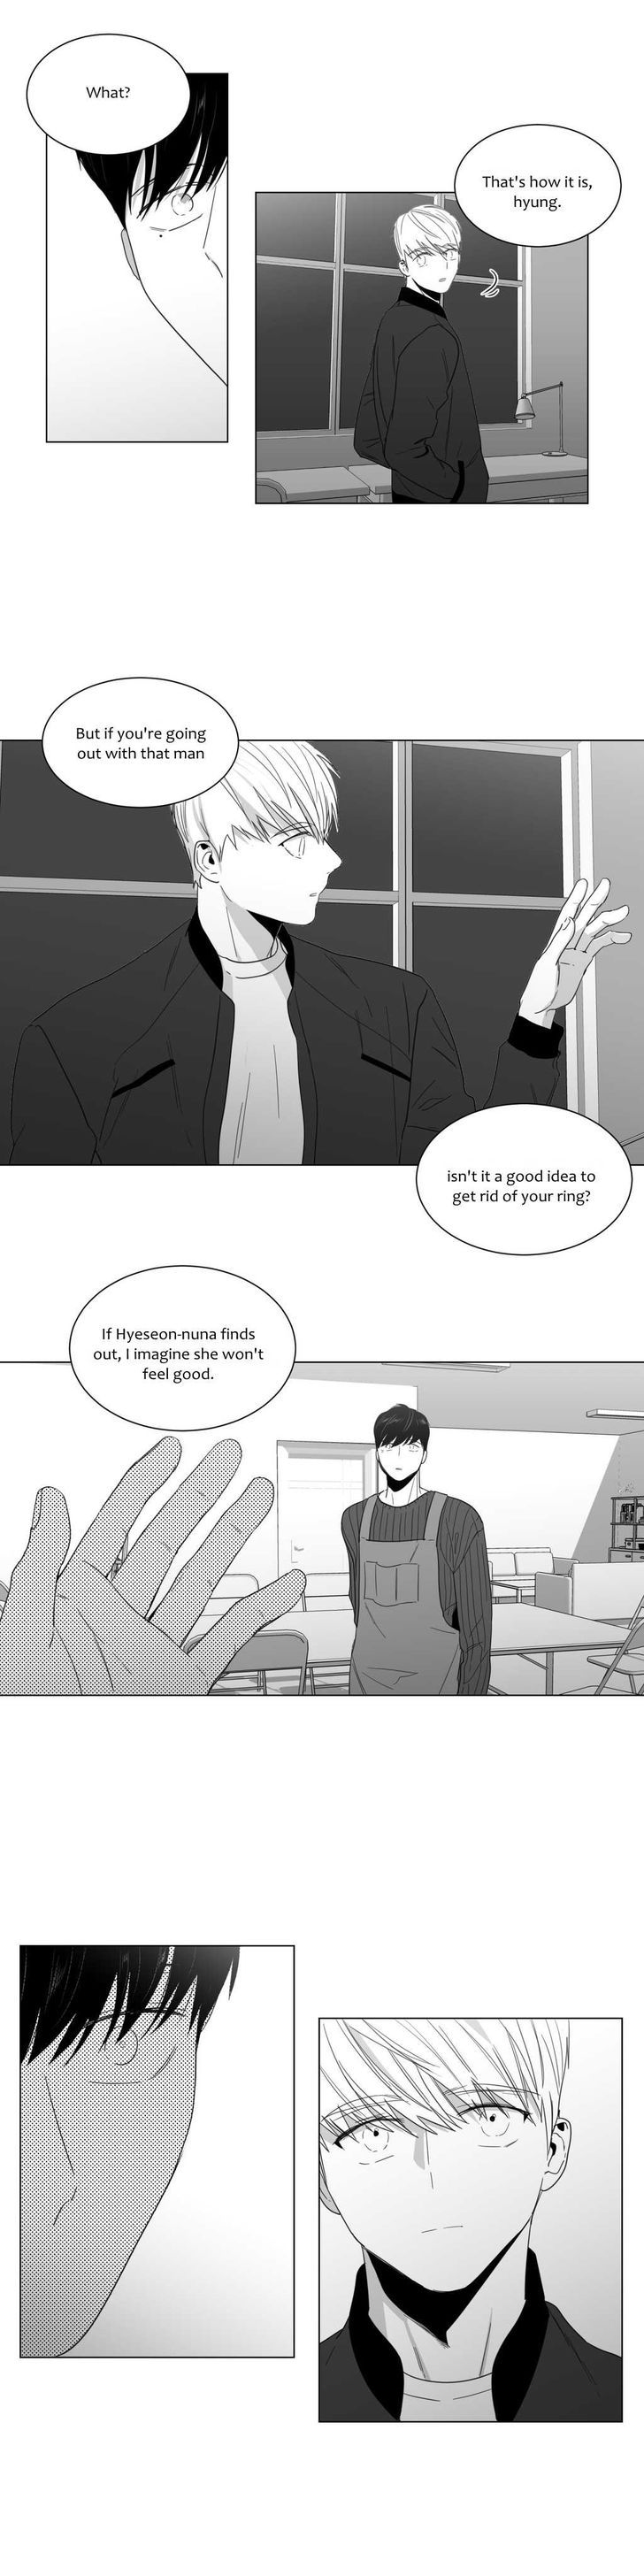 Lover Boy (Lezhin) Chapter 011 page 11